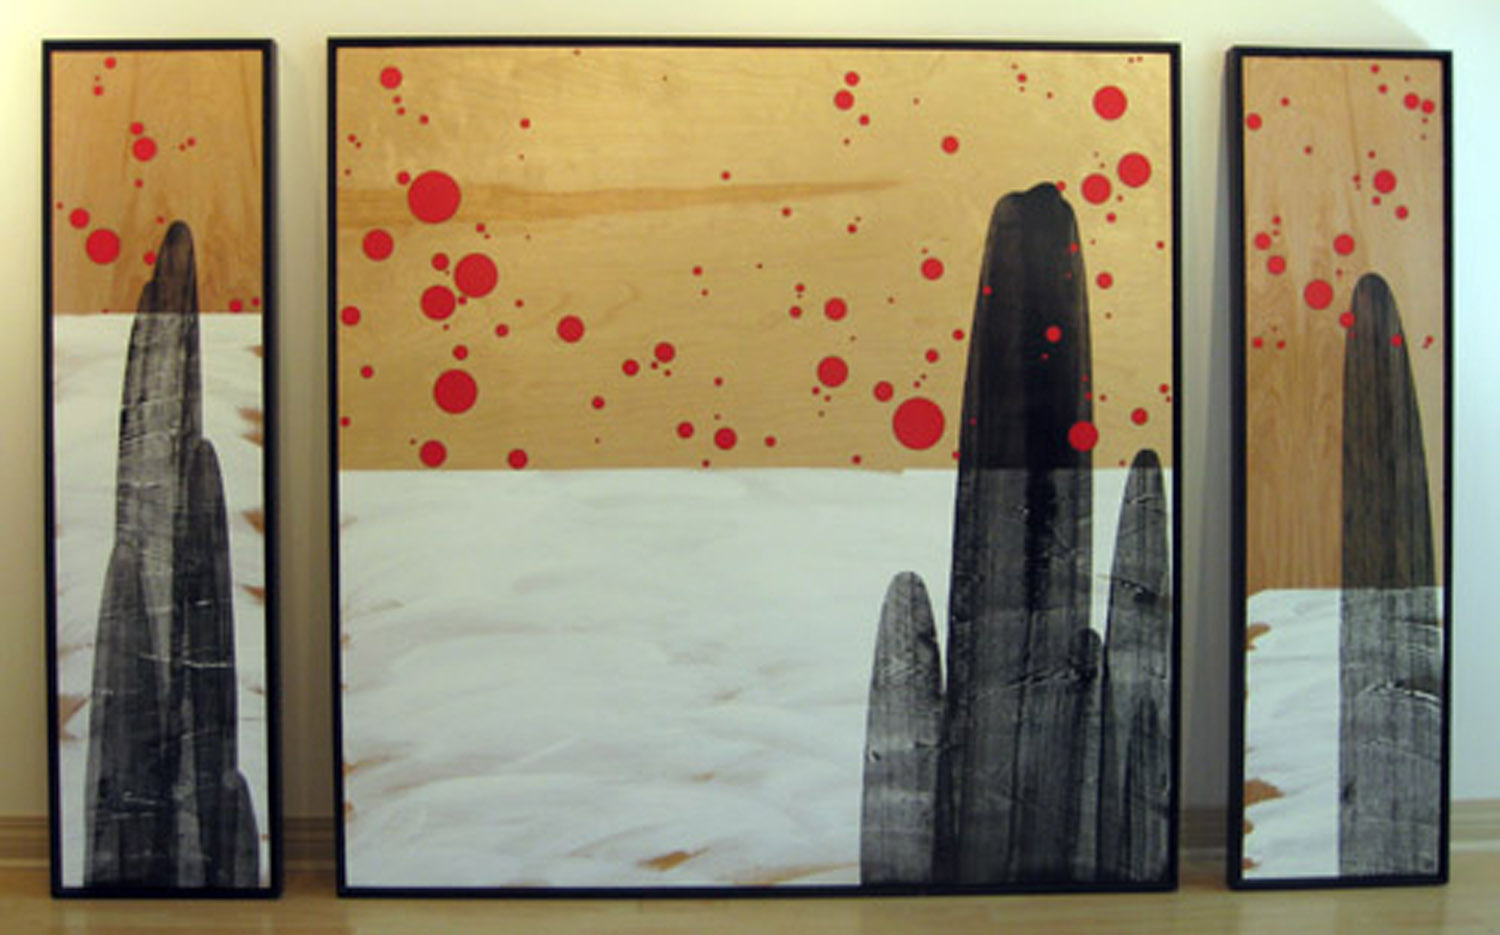    Monolith (triptych)    49.25" x 13", 49.25" x 49", 49.25" x 13"    
  
 0 
 0 
 0 
 
  
   Acrylic, graphite, varnish on wood   Price upon request 